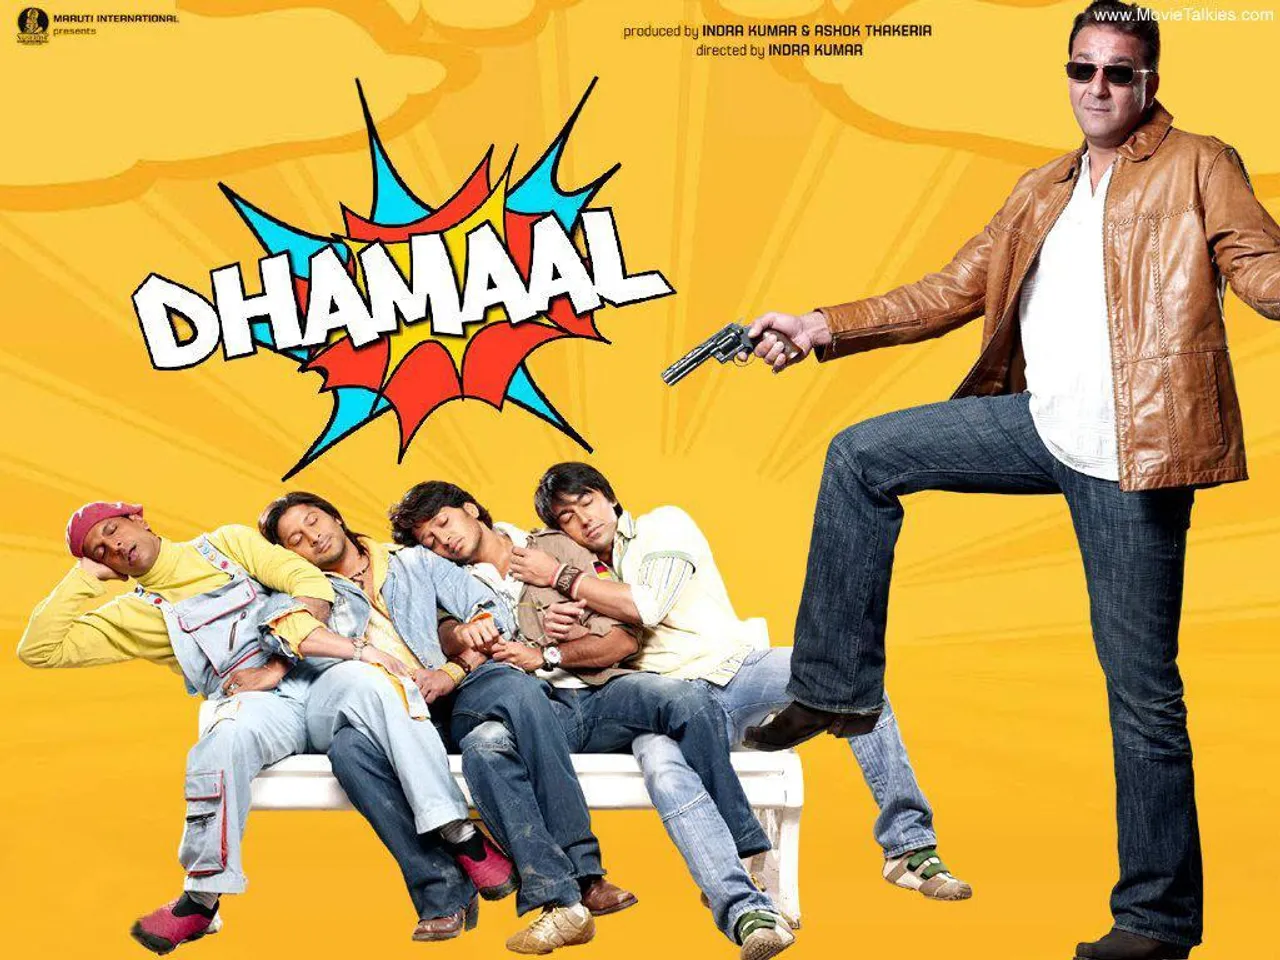 Non-Stop Dhamaal